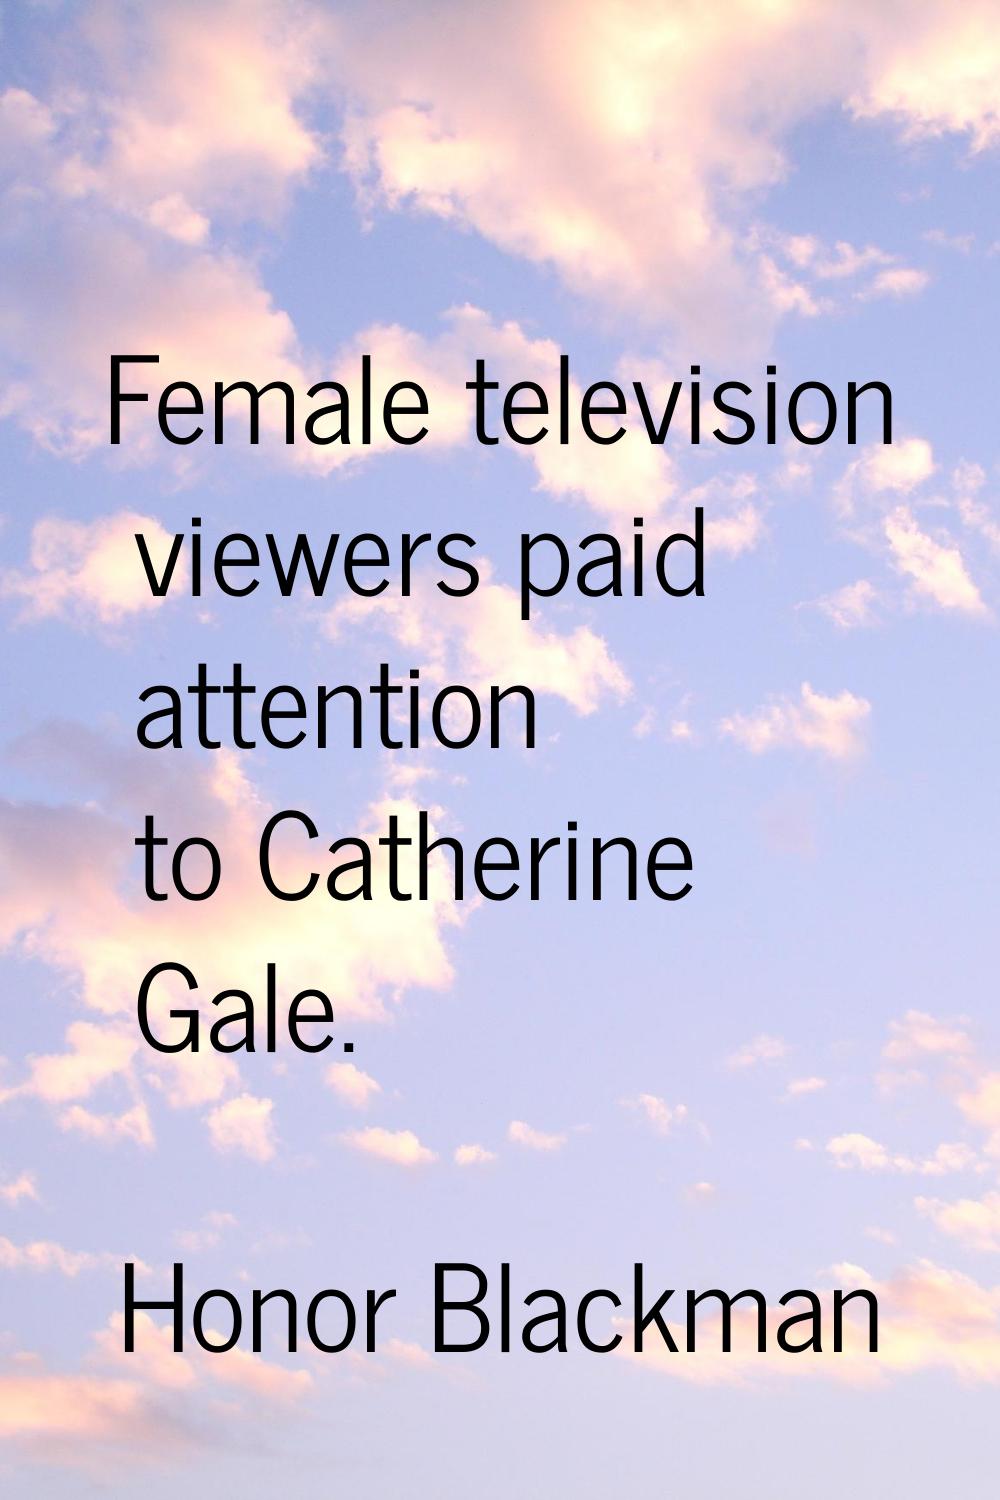 Female television viewers paid attention to Catherine Gale.